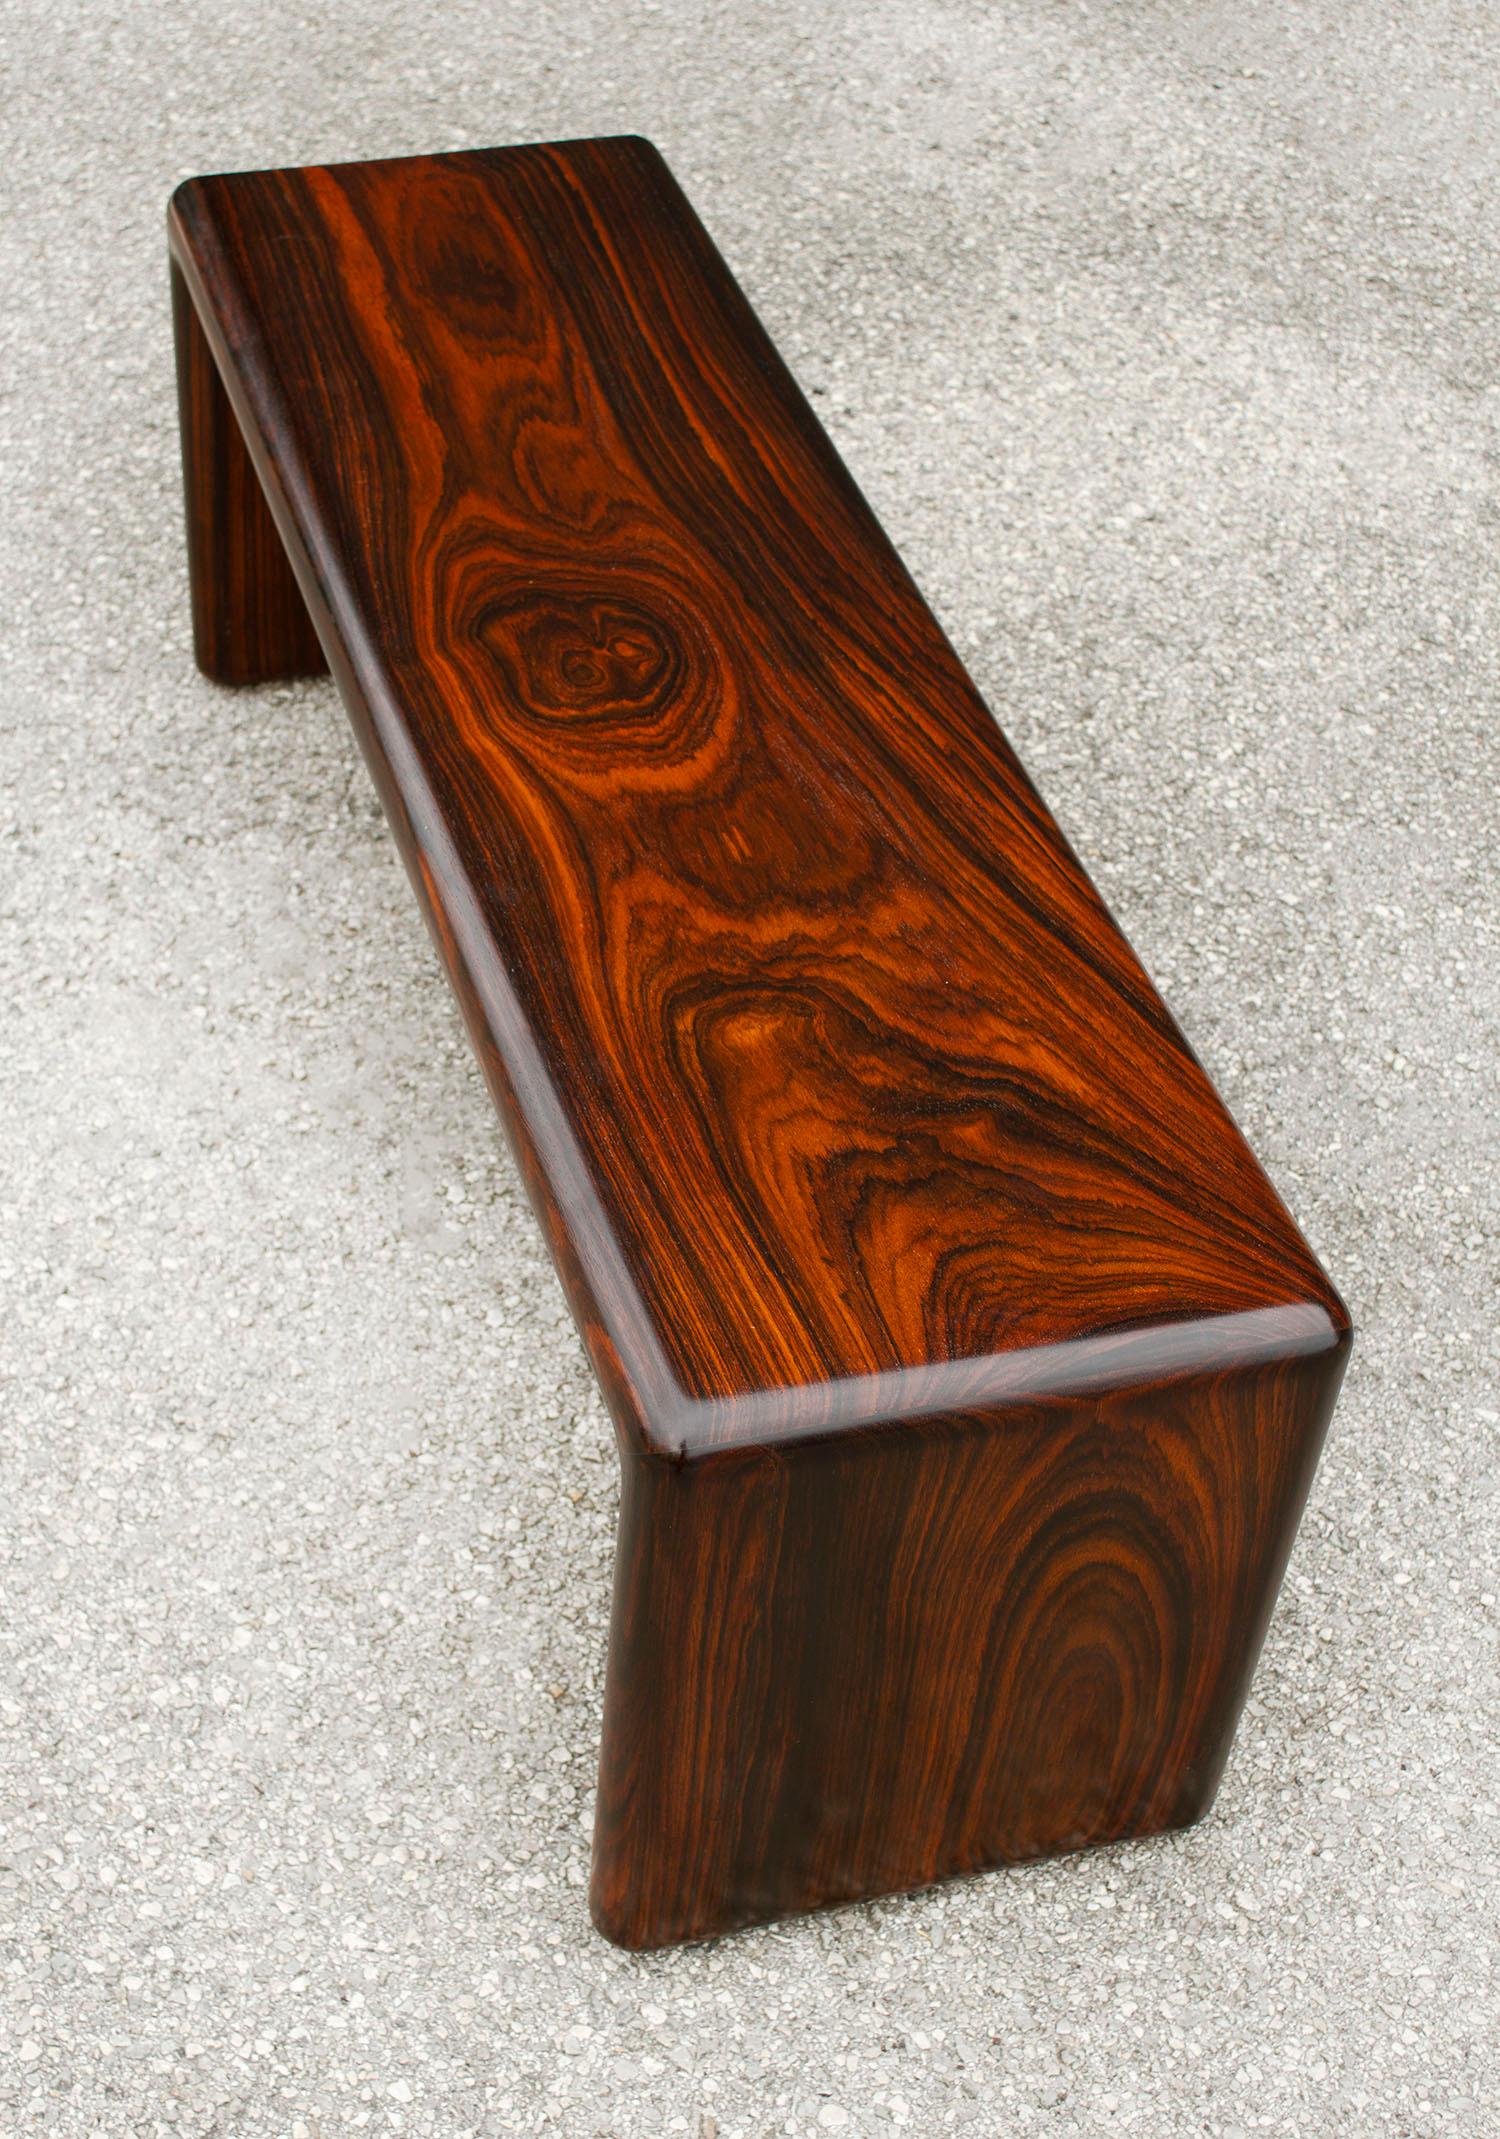 Mid-Century Modern Don Shoemaker Solid Brazilian Rosewood Table / Bench 1970s Studio Craft Mexico